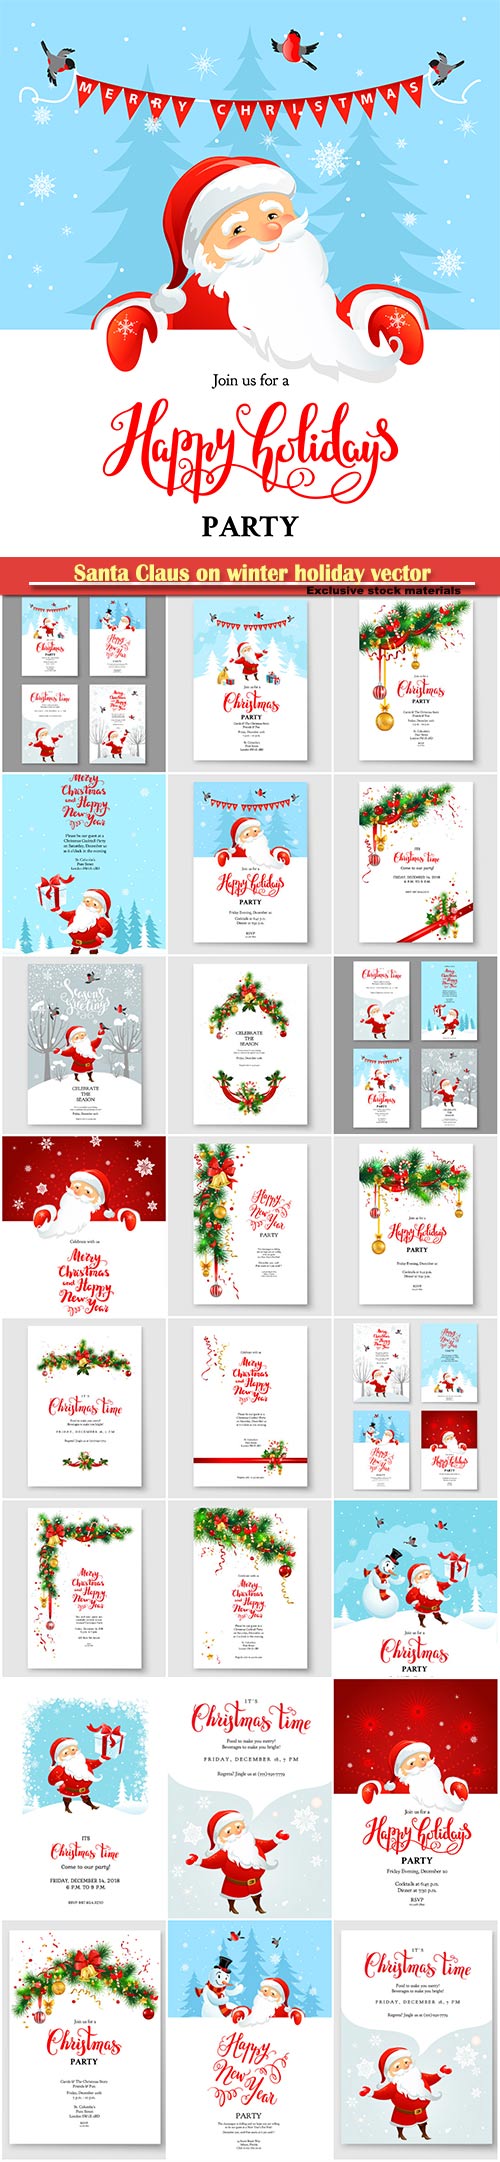 Santa Claus on winter holiday vector invitation, Christmas sample for banners, advertising, leaflet, cards